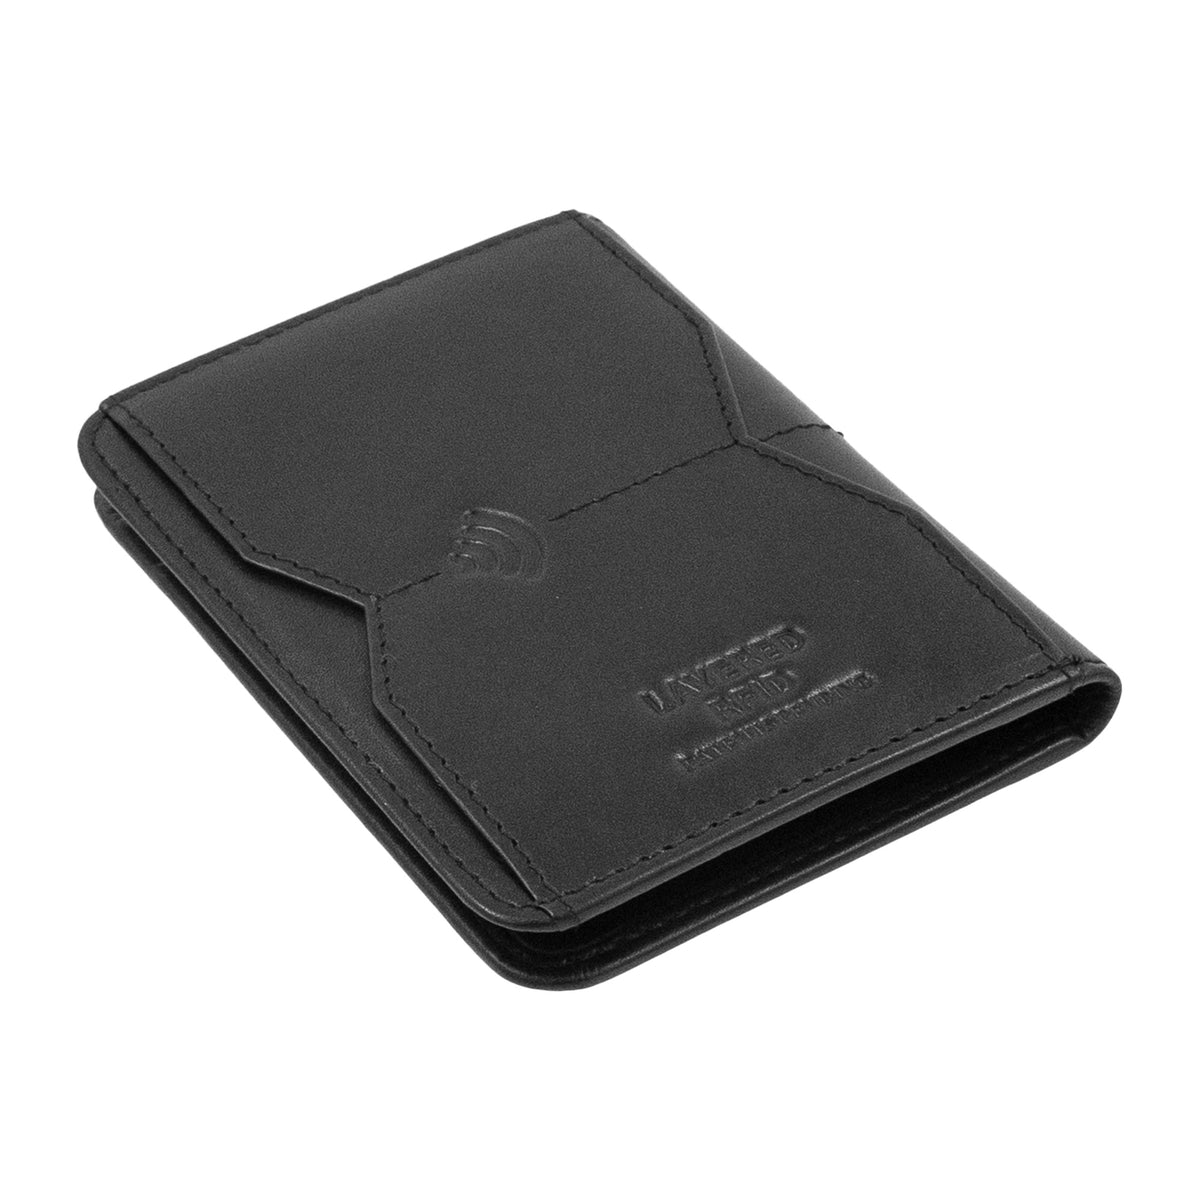 WI FOLD High-Performance Leather Wallet - Contactless and Biometric Payments - 9 Card Bifold - Layered RFID Protection - Minimalistic Credit Card Holder